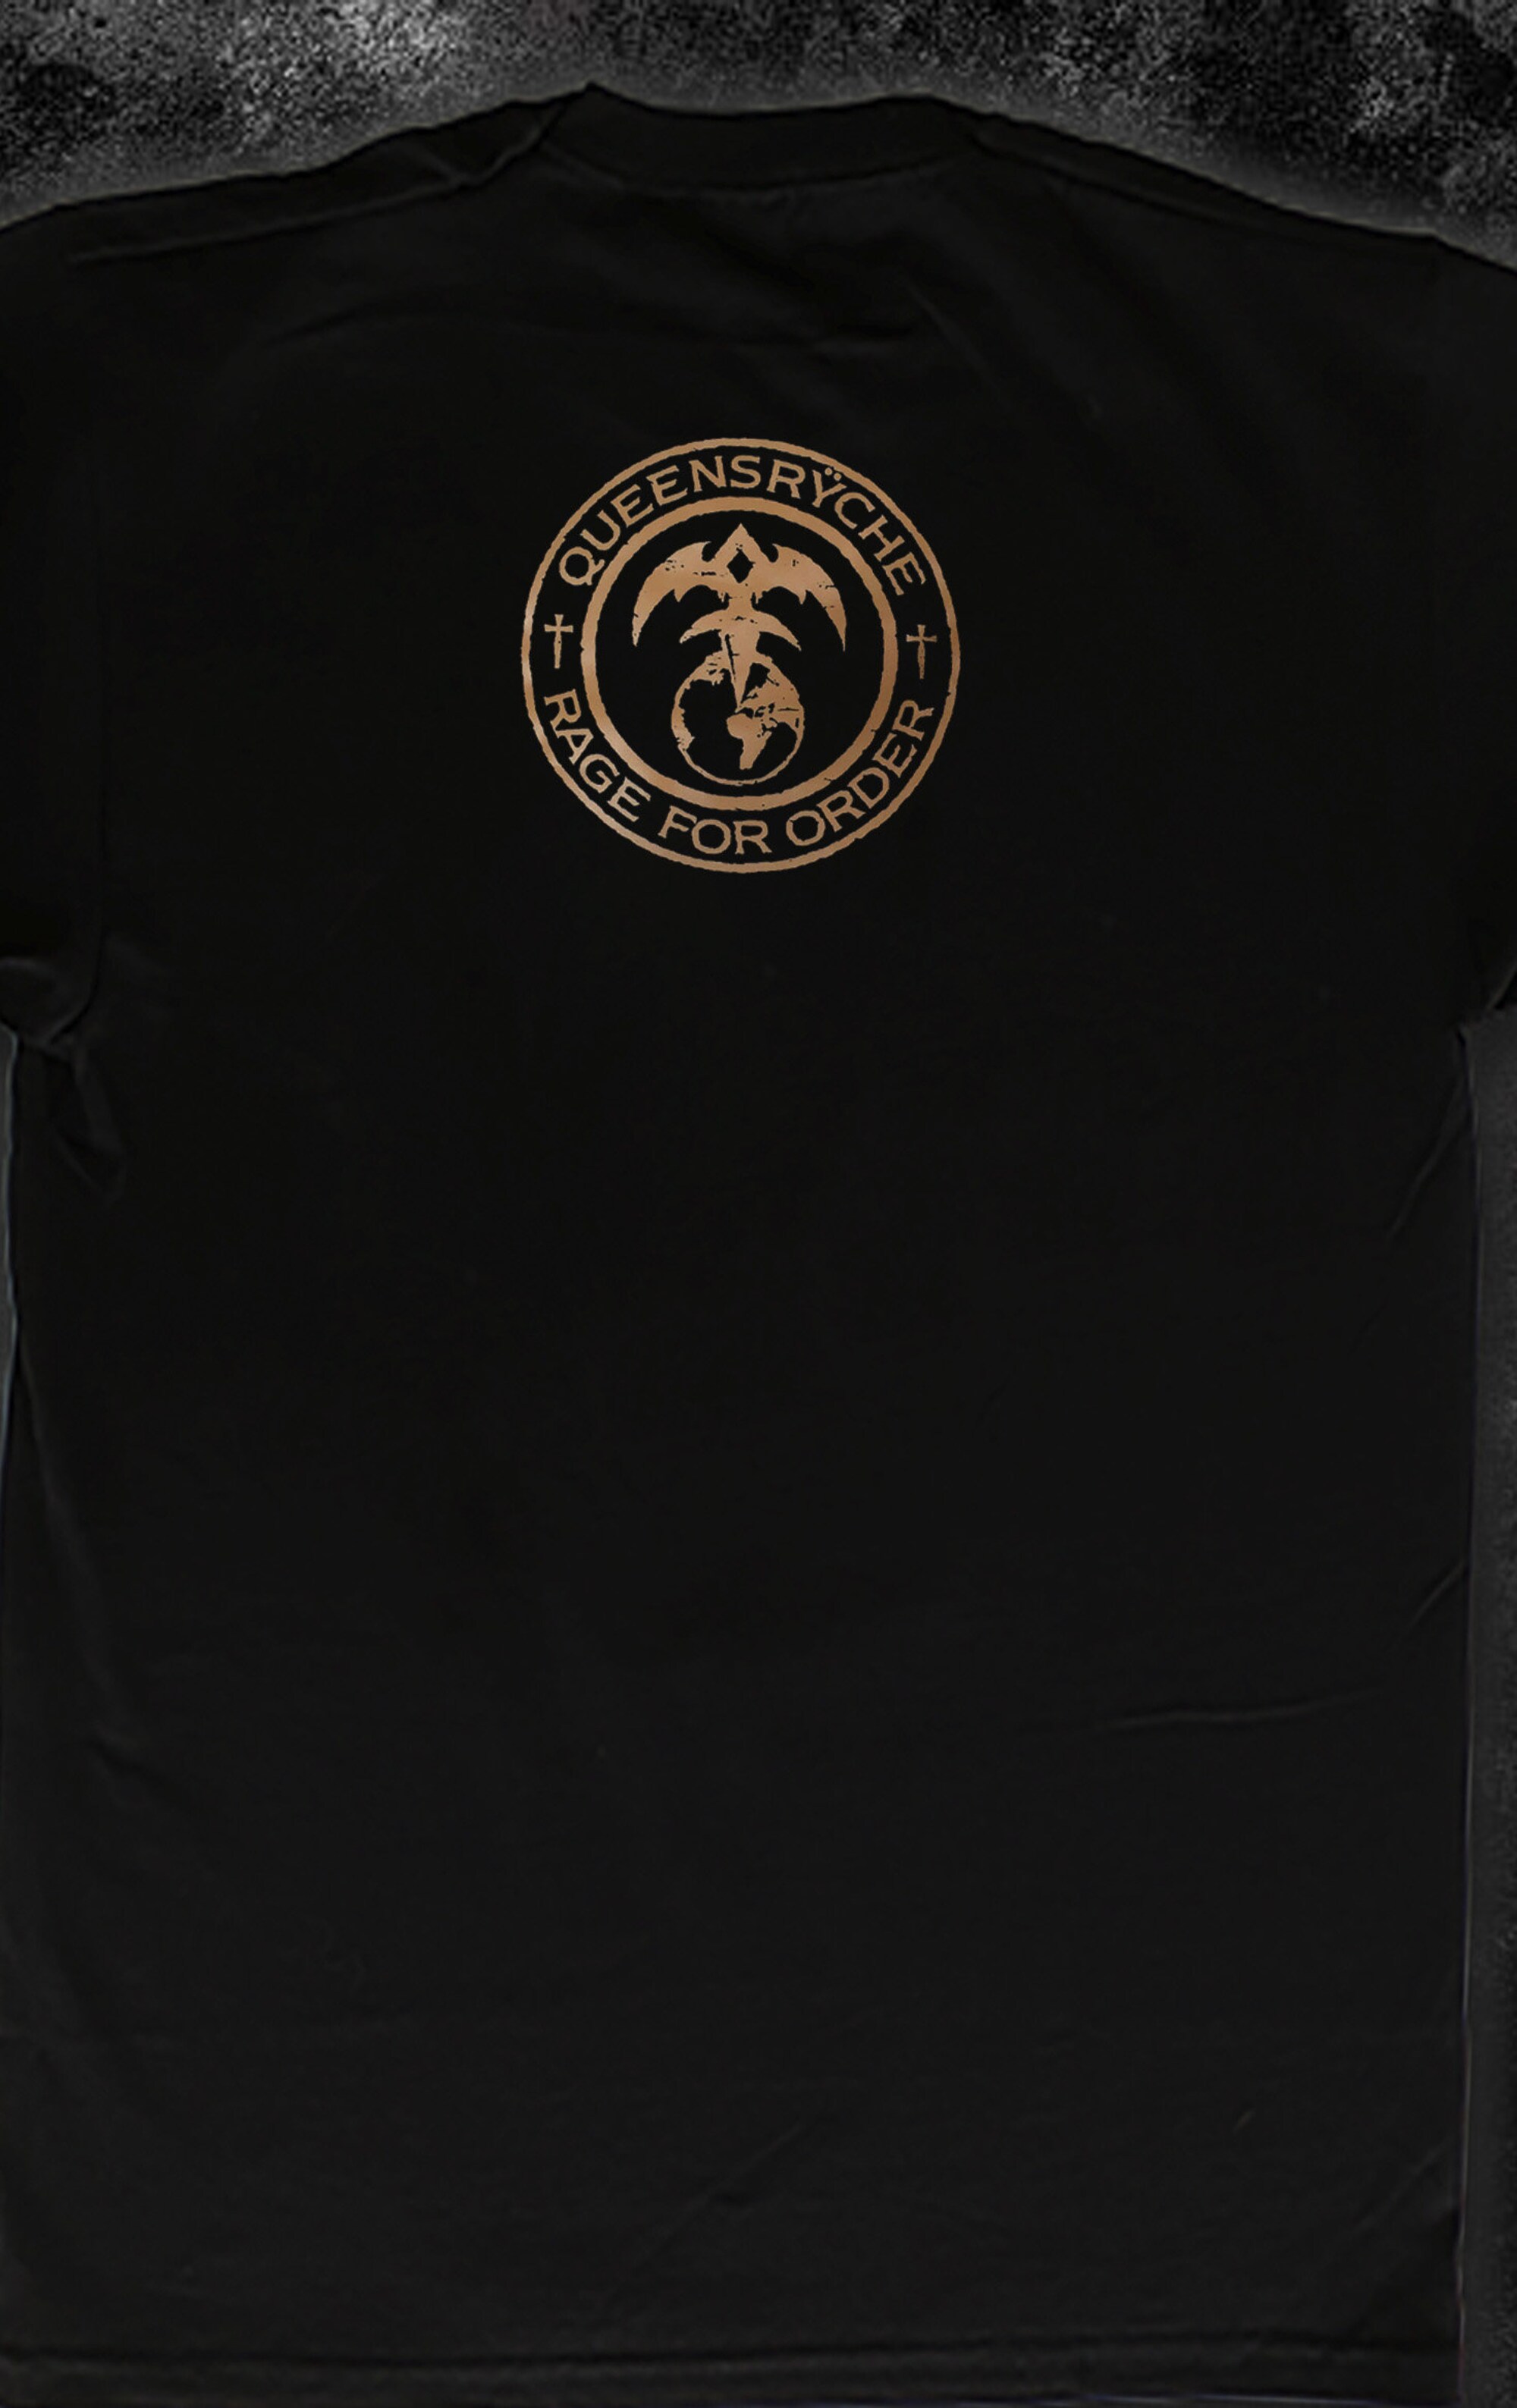 QUEENSRYCHE- Rage For Order t-shirt